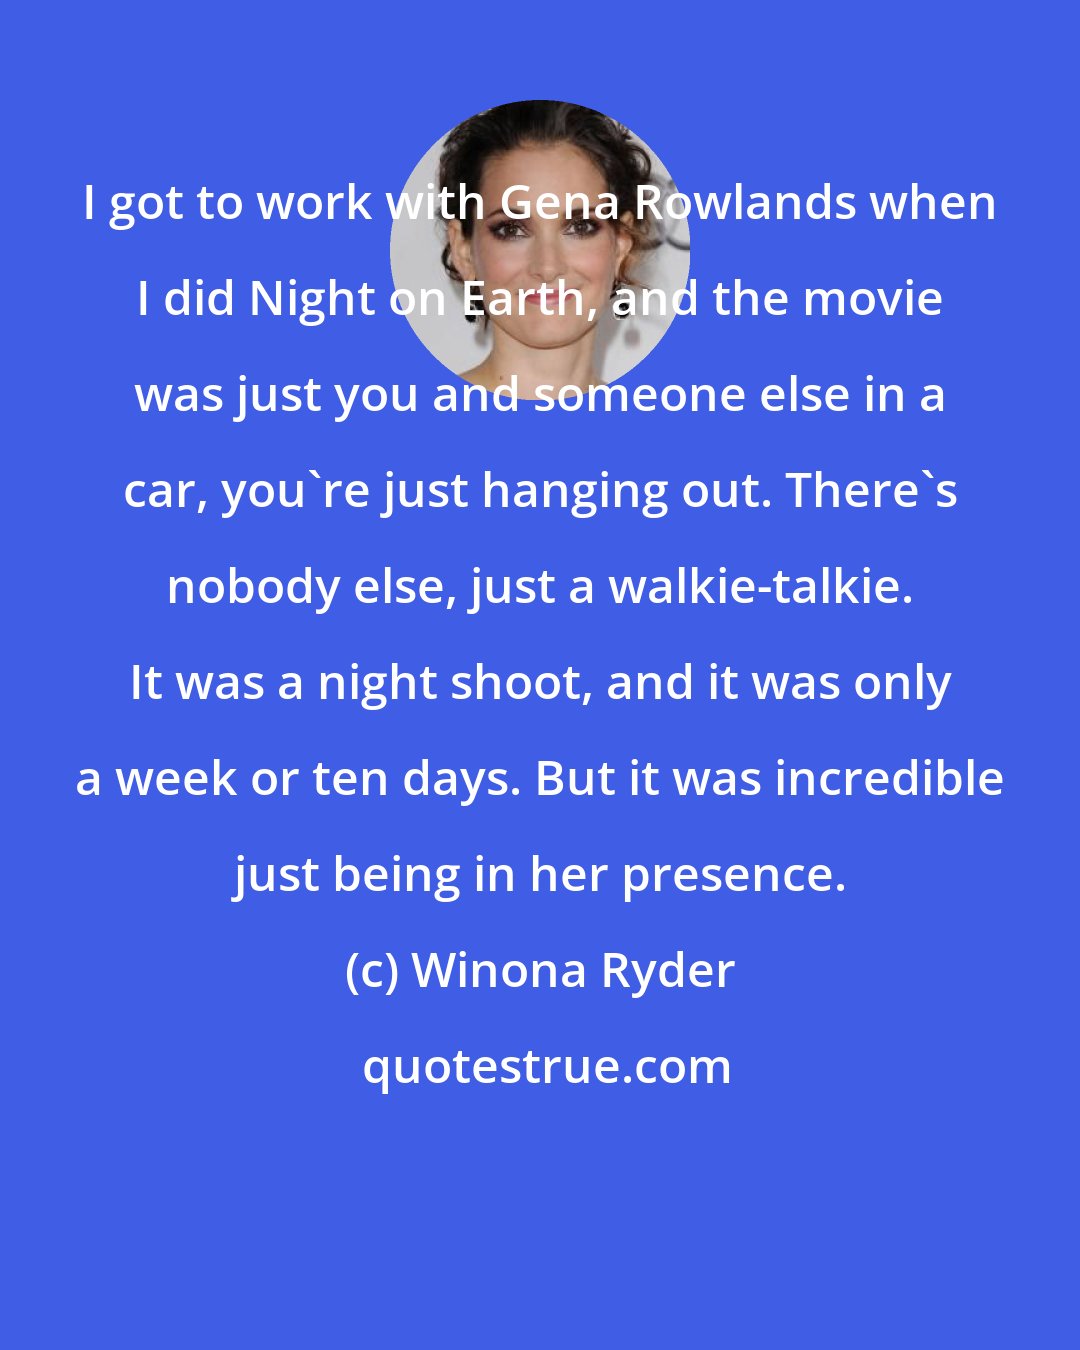 Winona Ryder: I got to work with Gena Rowlands when I did Night on Earth, and the movie was just you and someone else in a car, you're just hanging out. There's nobody else, just a walkie-talkie. It was a night shoot, and it was only a week or ten days. But it was incredible just being in her presence.